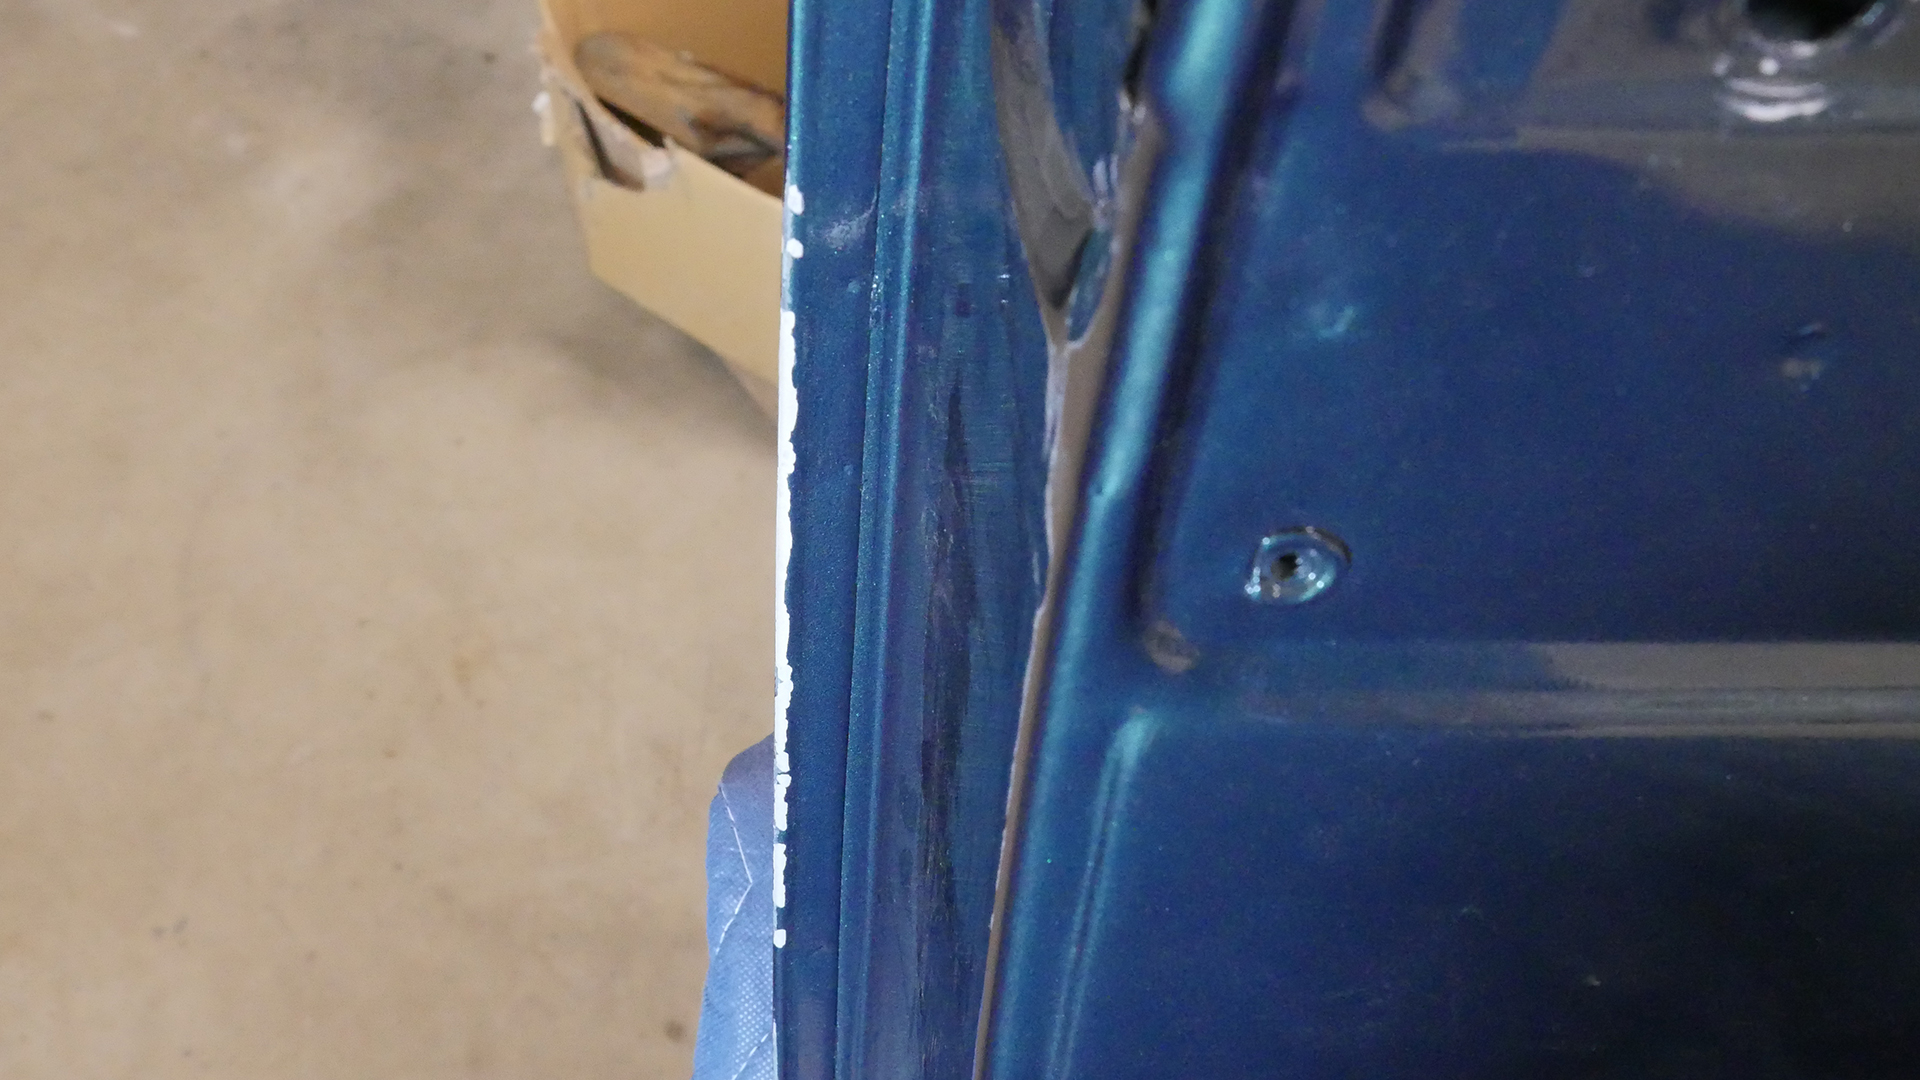 Damaged door paint due to interference with cowl when opening doors. Luckily the cowl can just be polished.